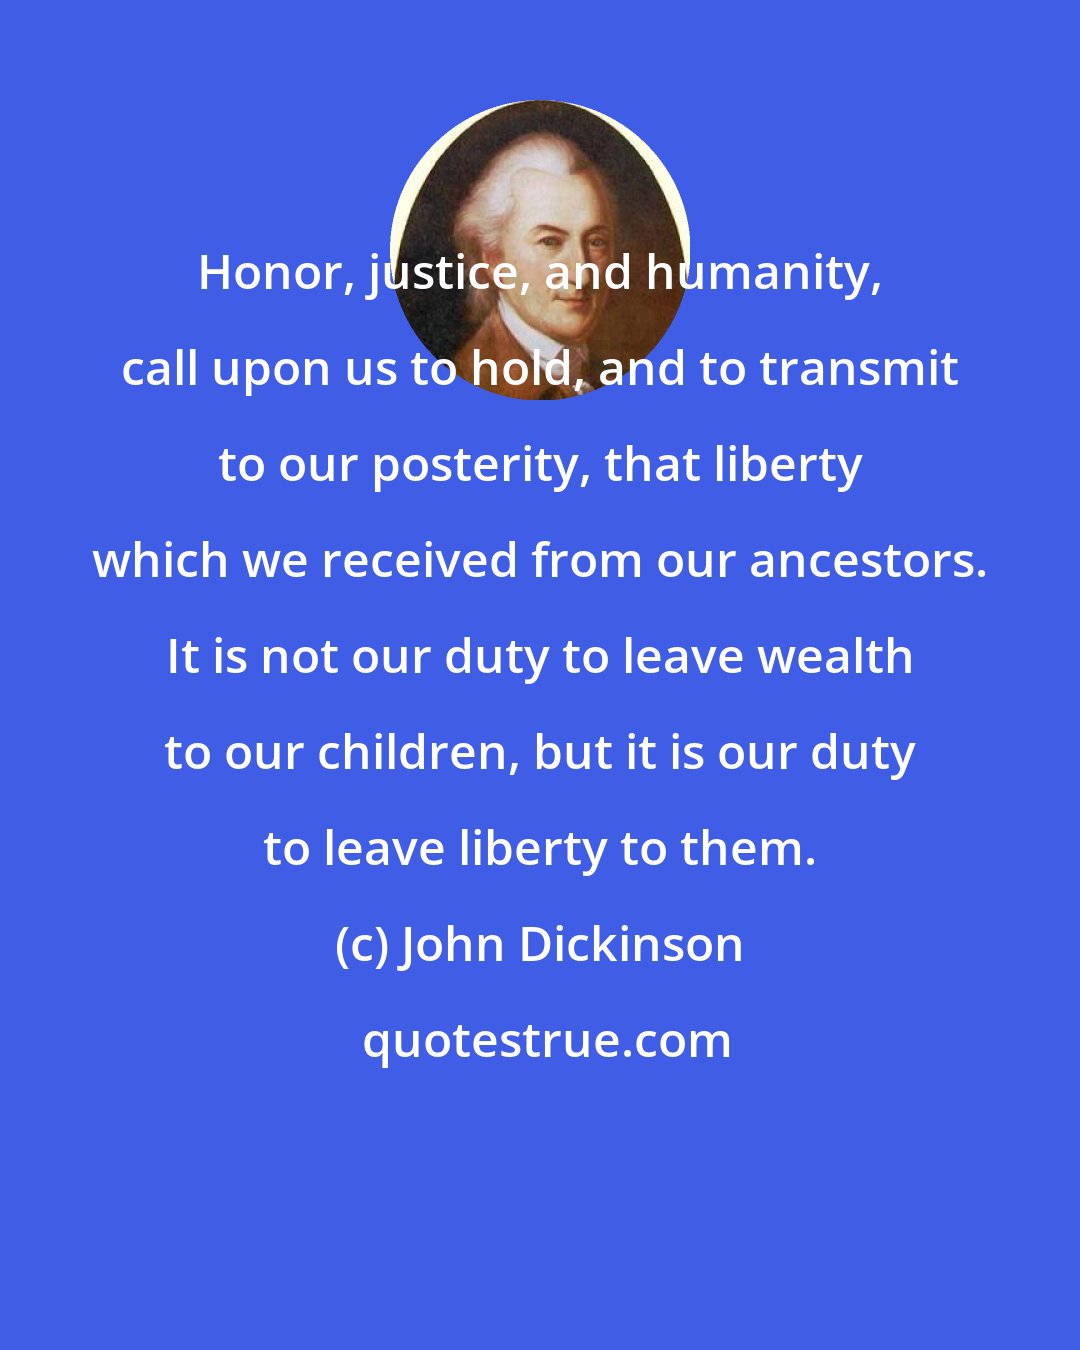 John Dickinson: Honor, justice, and humanity, call upon us to hold, and to transmit to our posterity, that liberty which we received from our ancestors. It is not our duty to leave wealth to our children, but it is our duty to leave liberty to them.